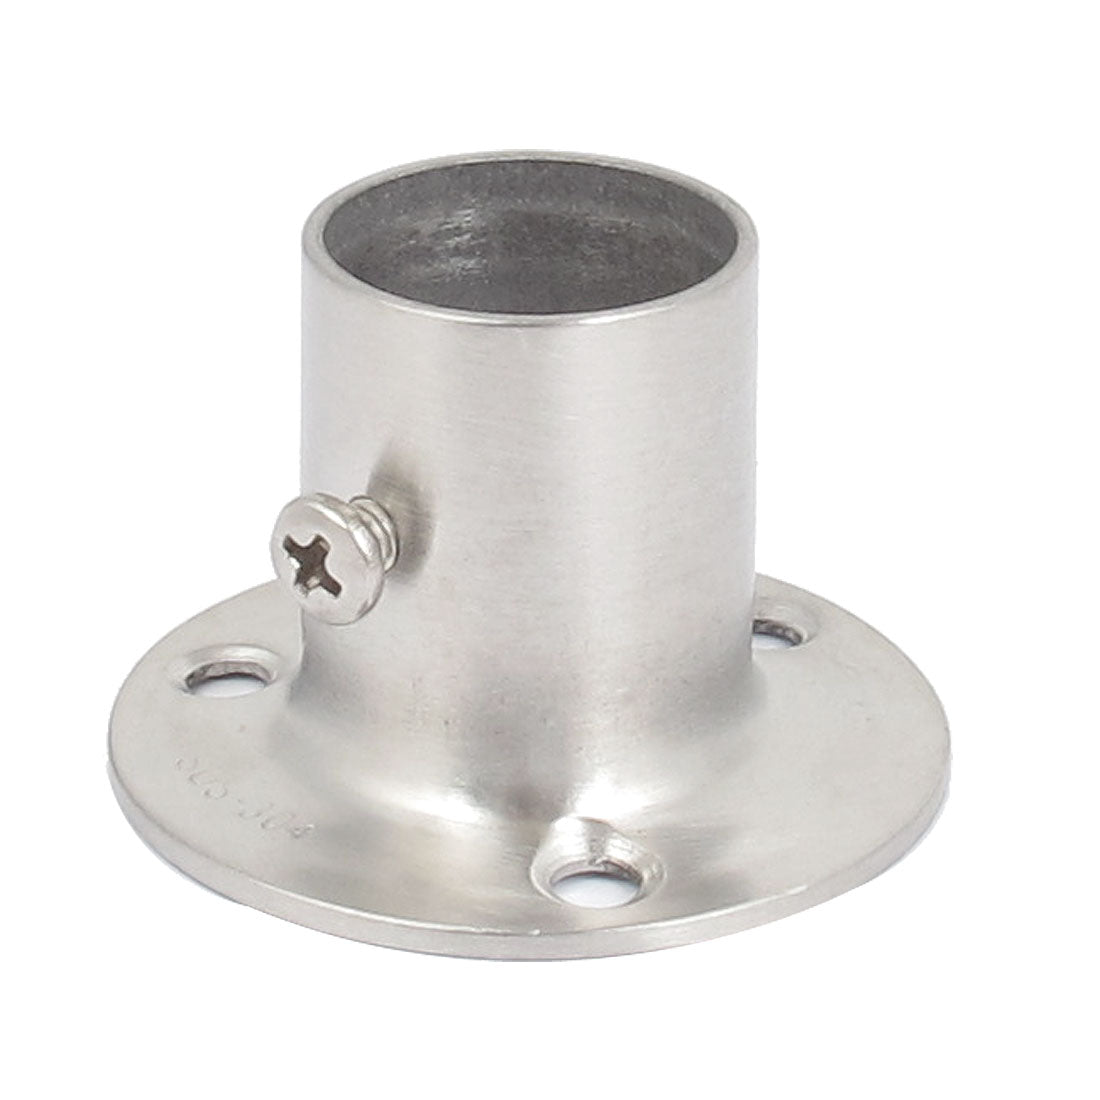 uxcell Uxcell Wardrobe Hanging Rail Rod End Flange Support Bracket Socket for 19mm Dia Pipe